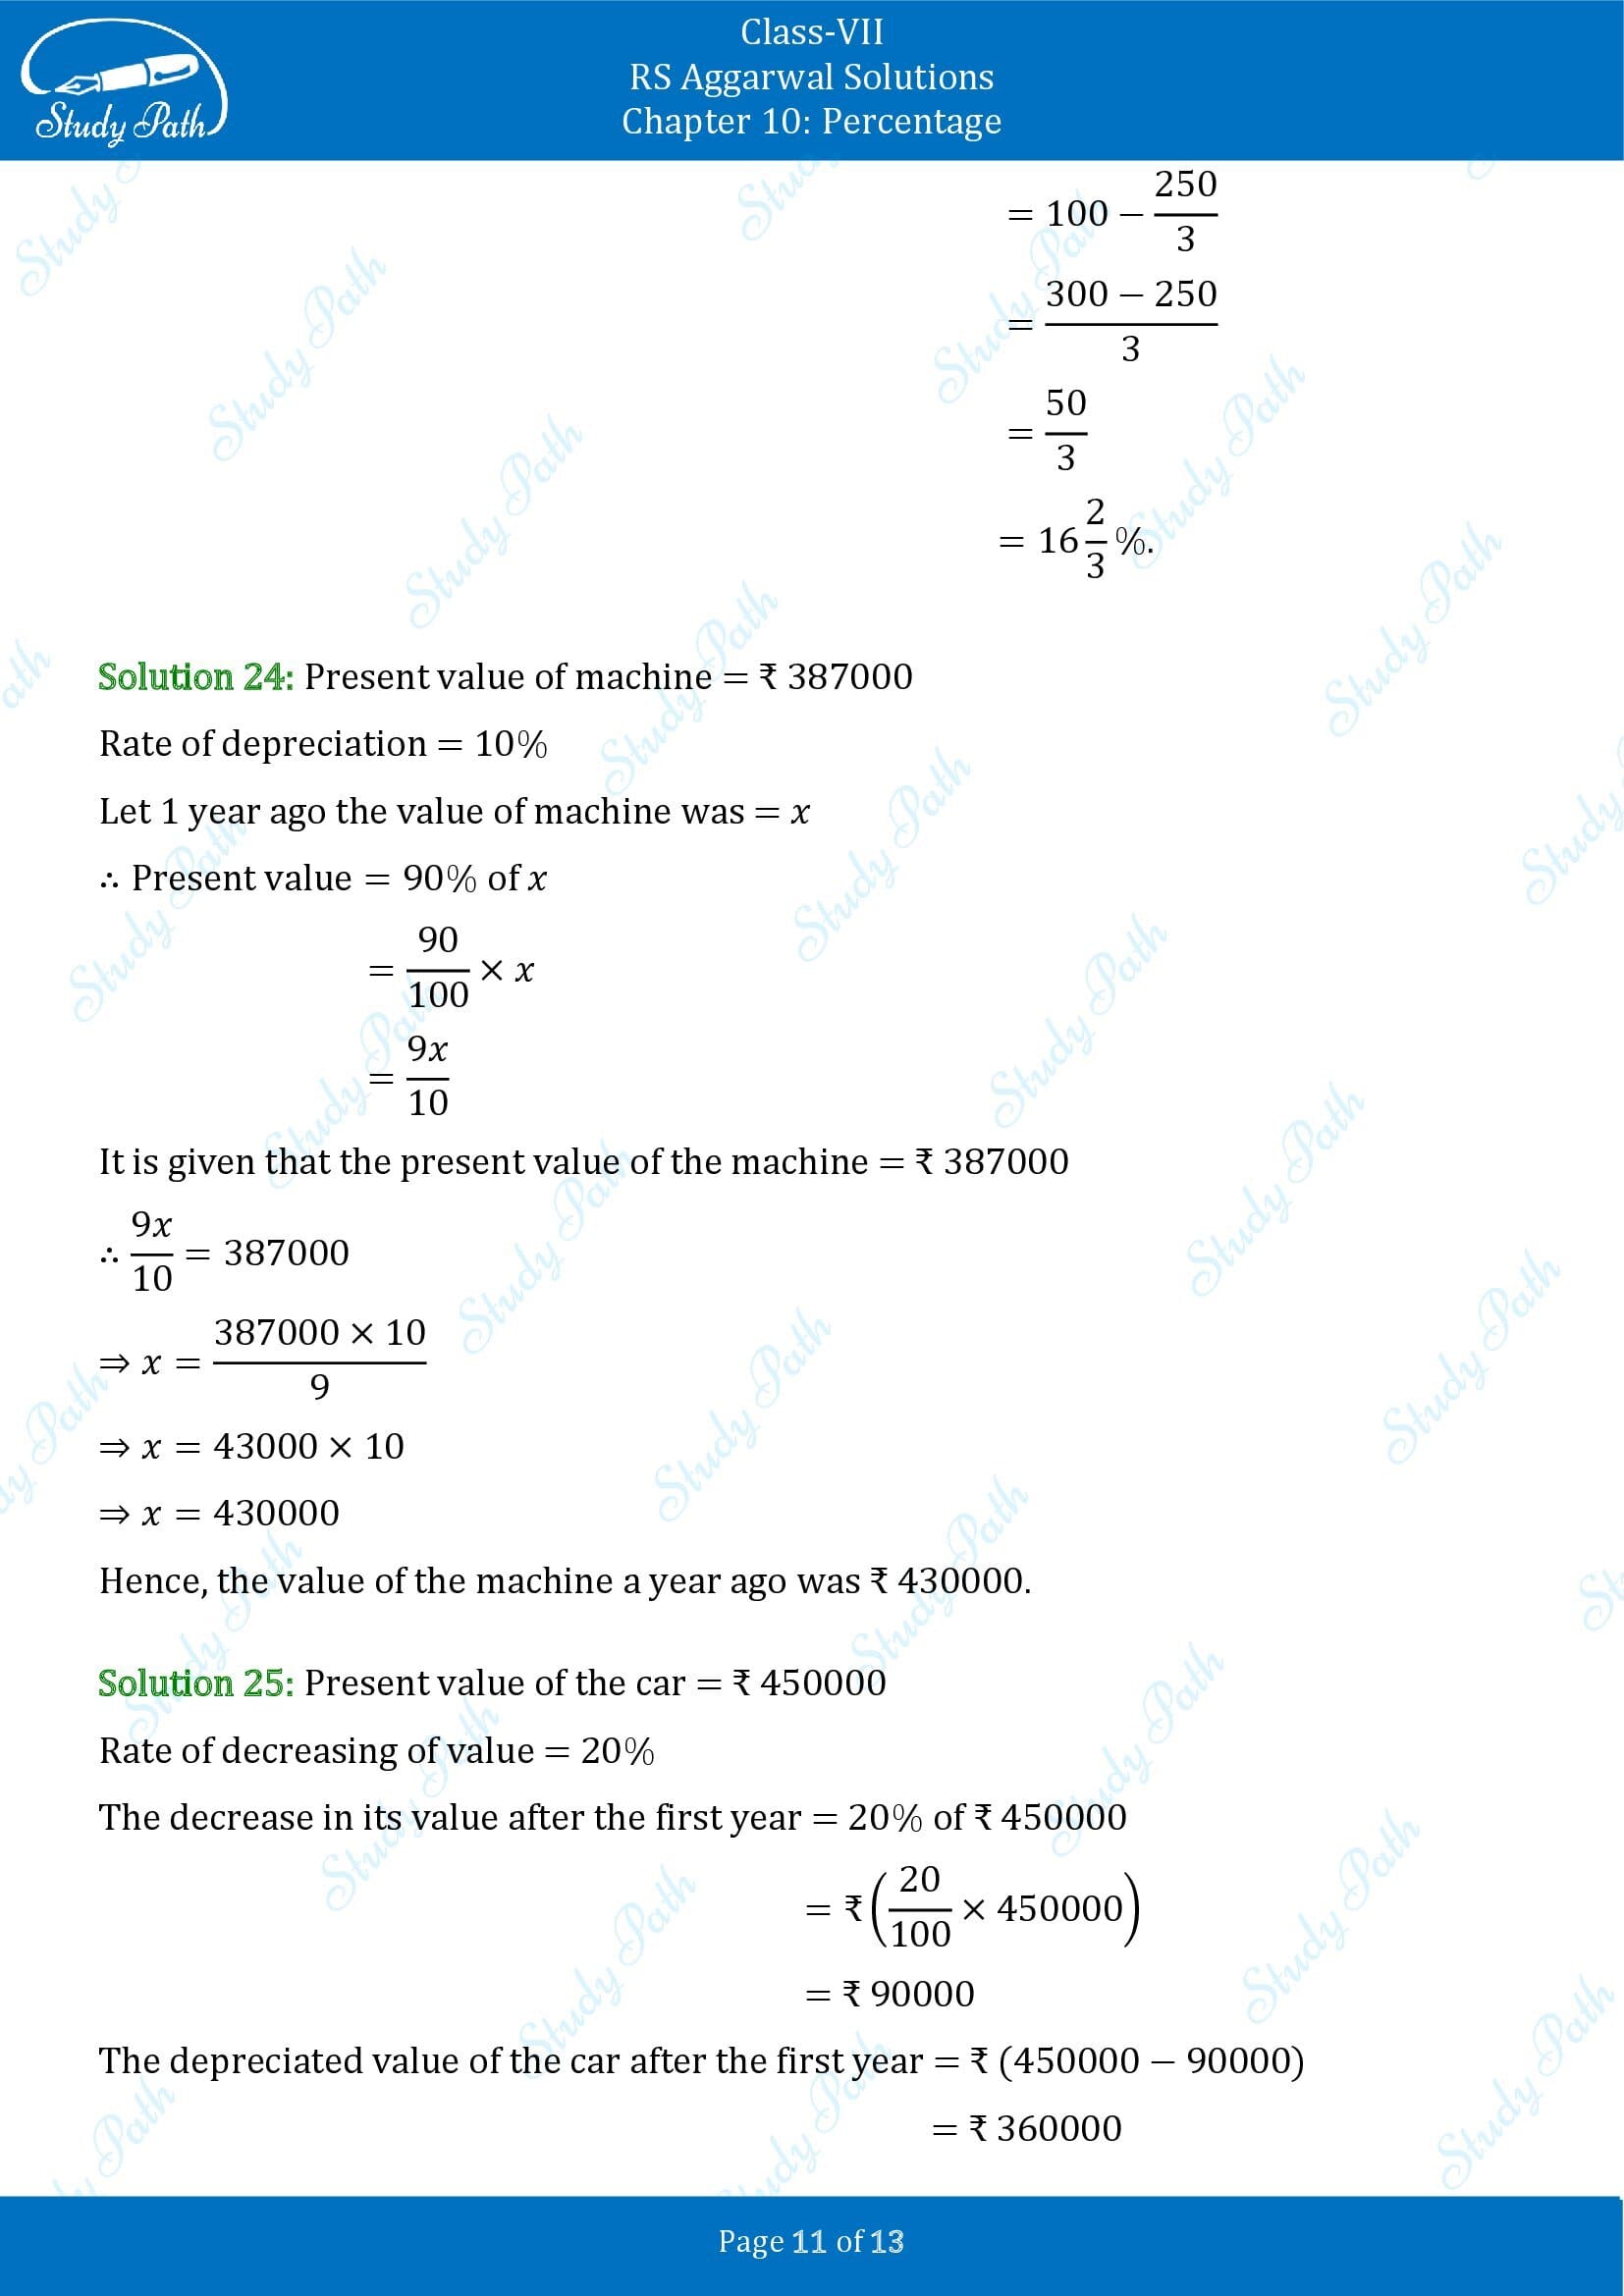 RS Aggarwal Solutions Class 7 Chapter 10 Percentage Exercise 10B 00011